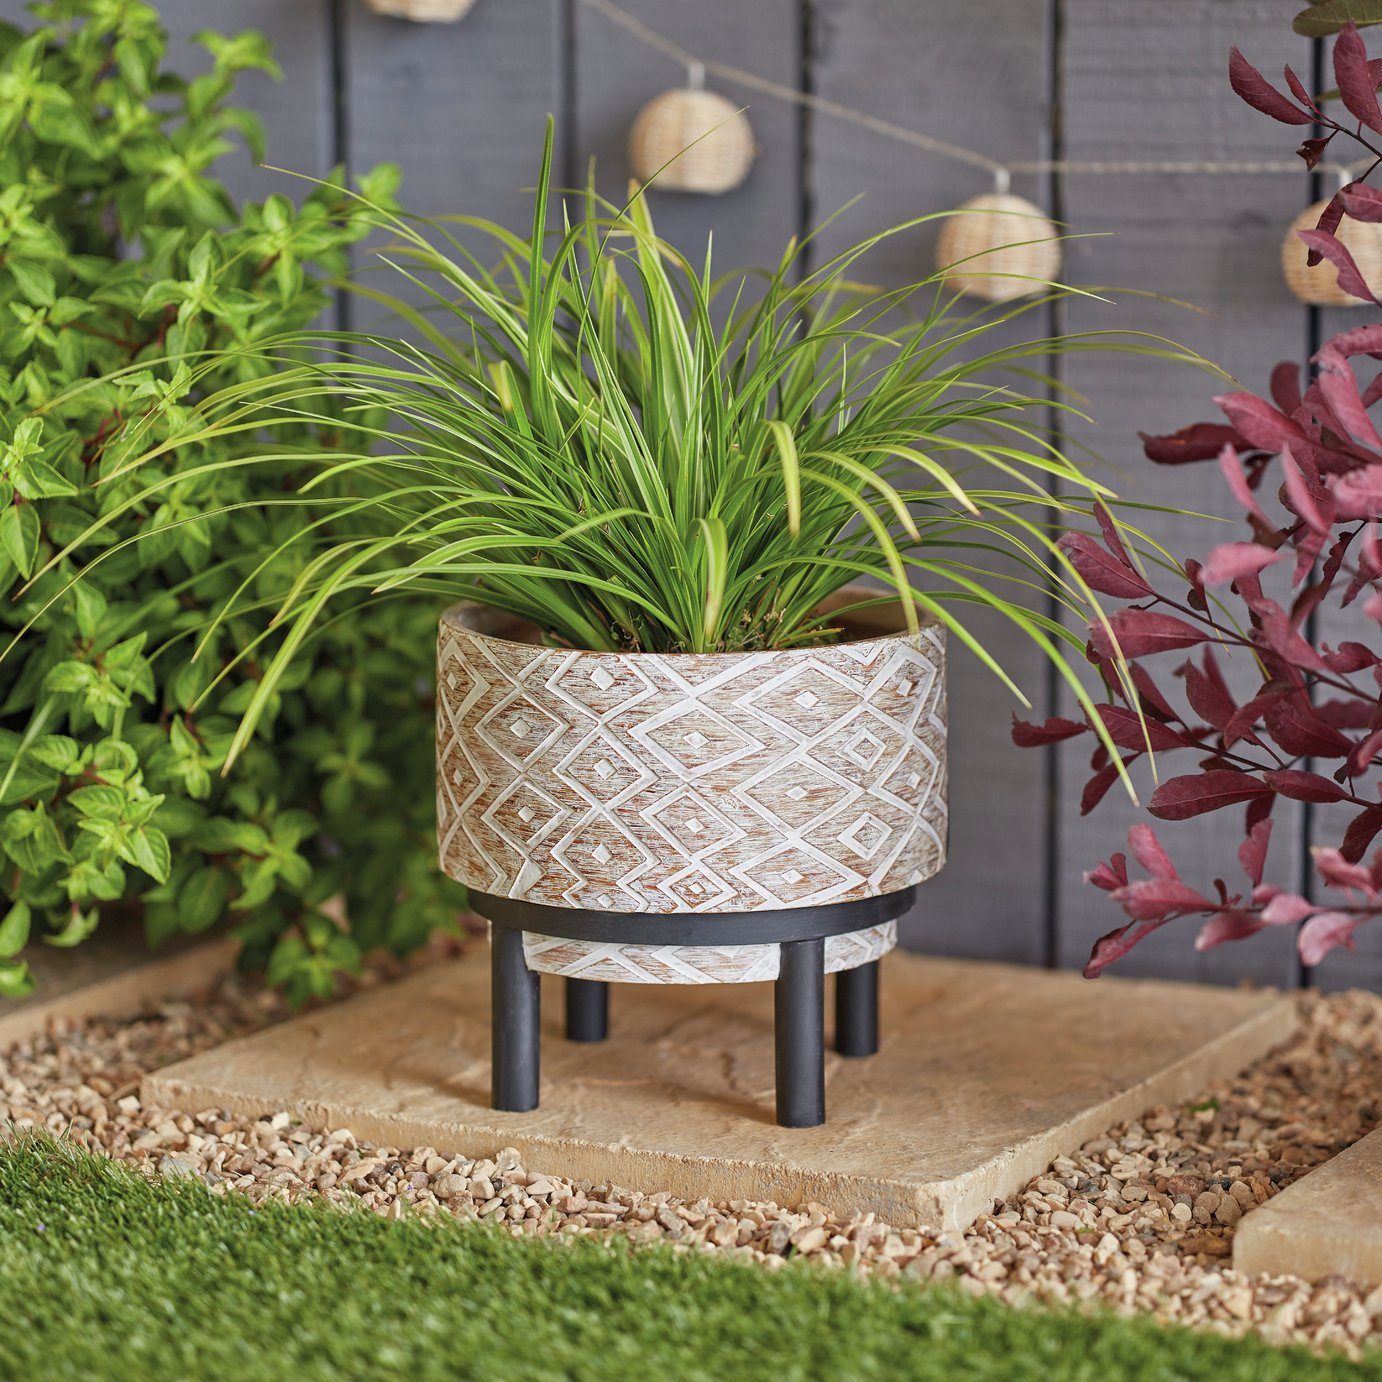 Argos Home Giant Wooden Effect Plant Pot with Stand Review